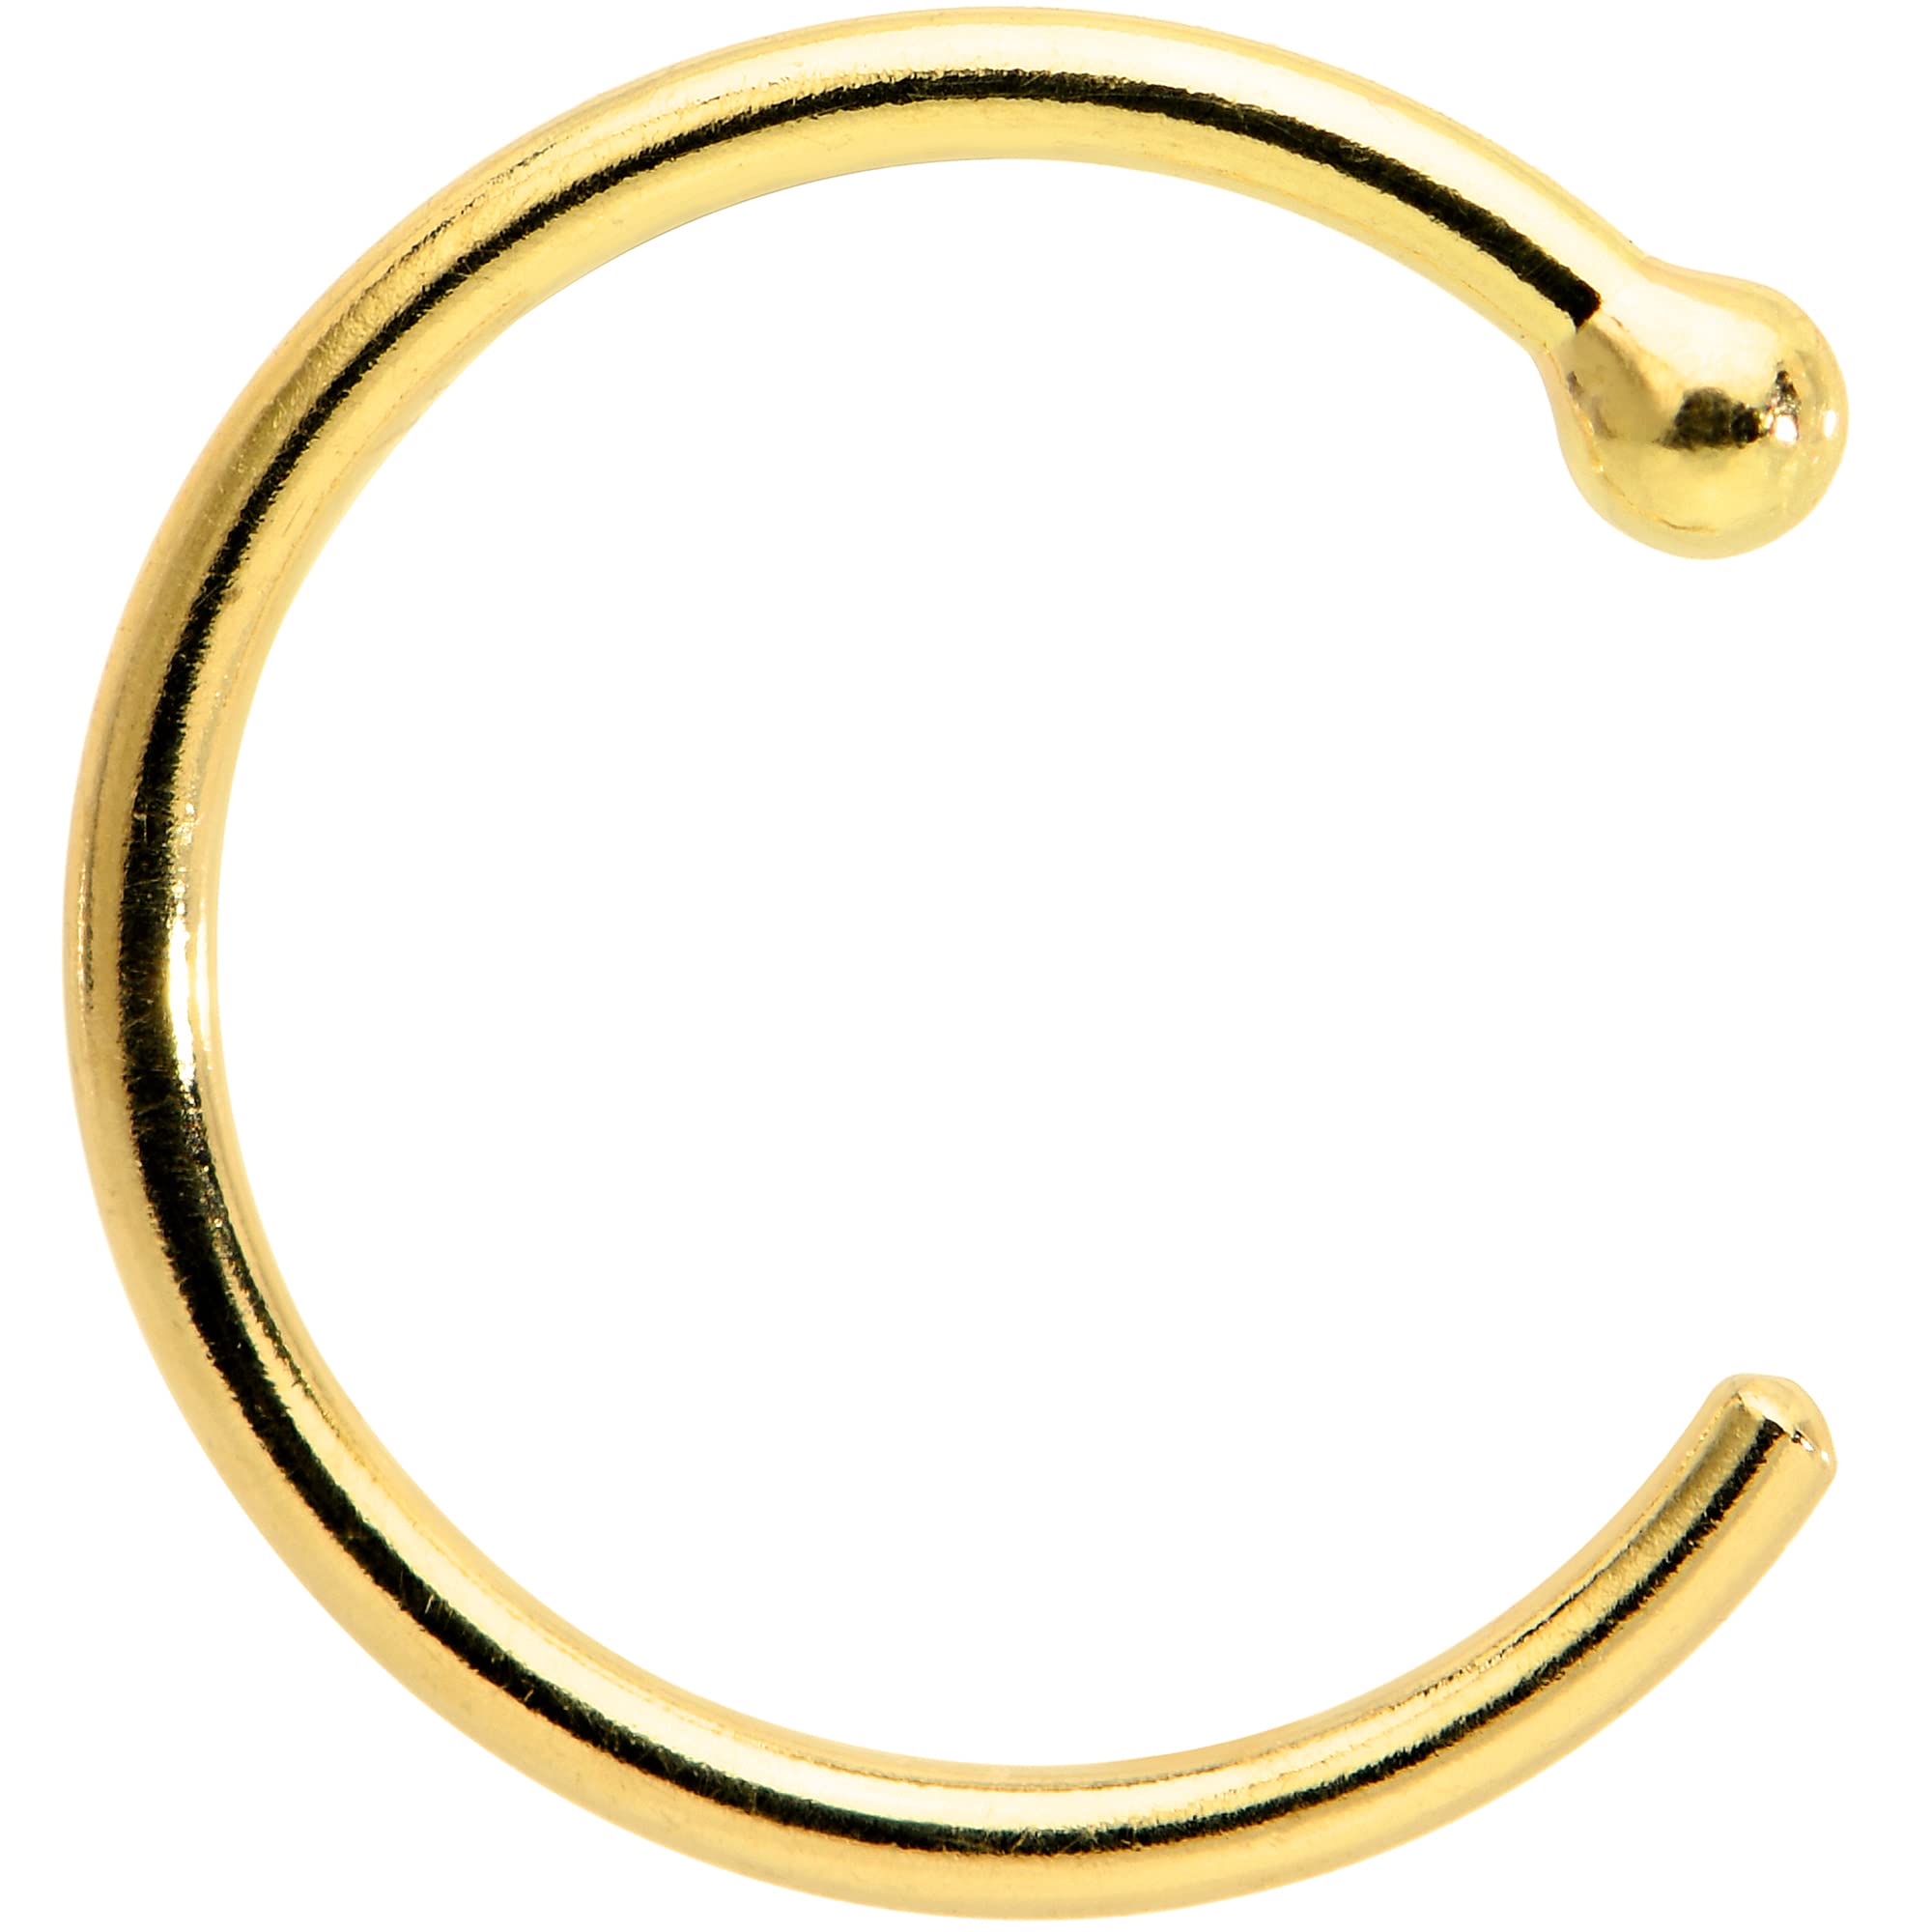 Body Candy Nose Hoops in 18k Gold 20 Gauge 5/16